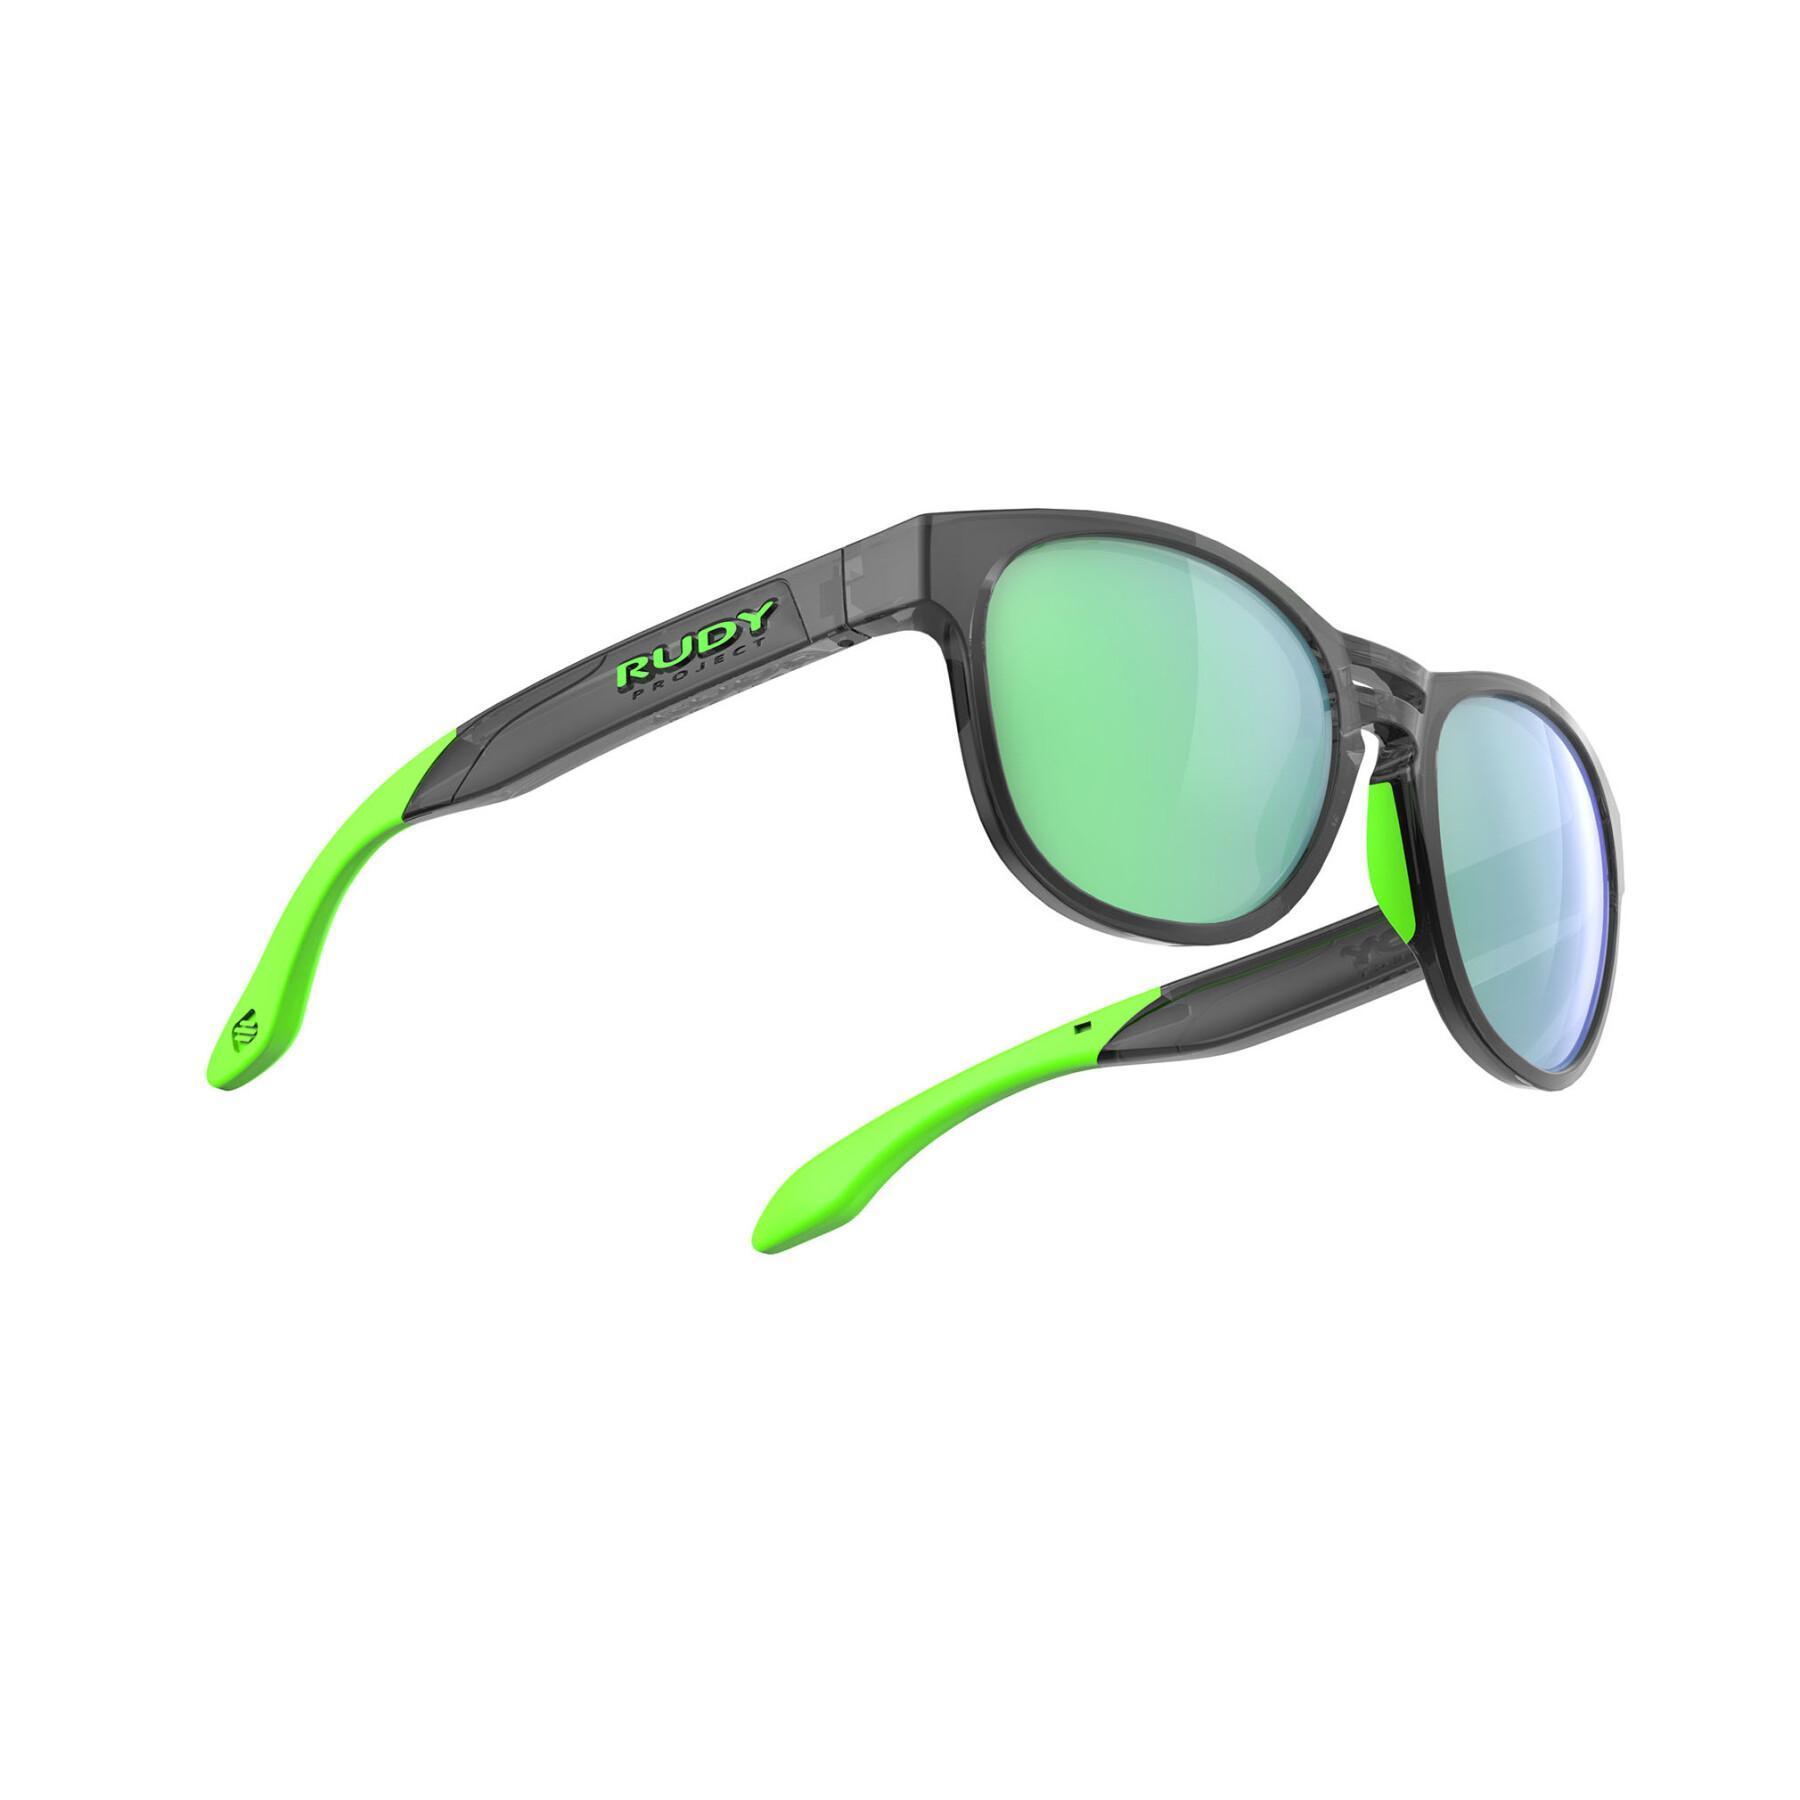 Gafas de sol Rudy Project spinair 56 water sports